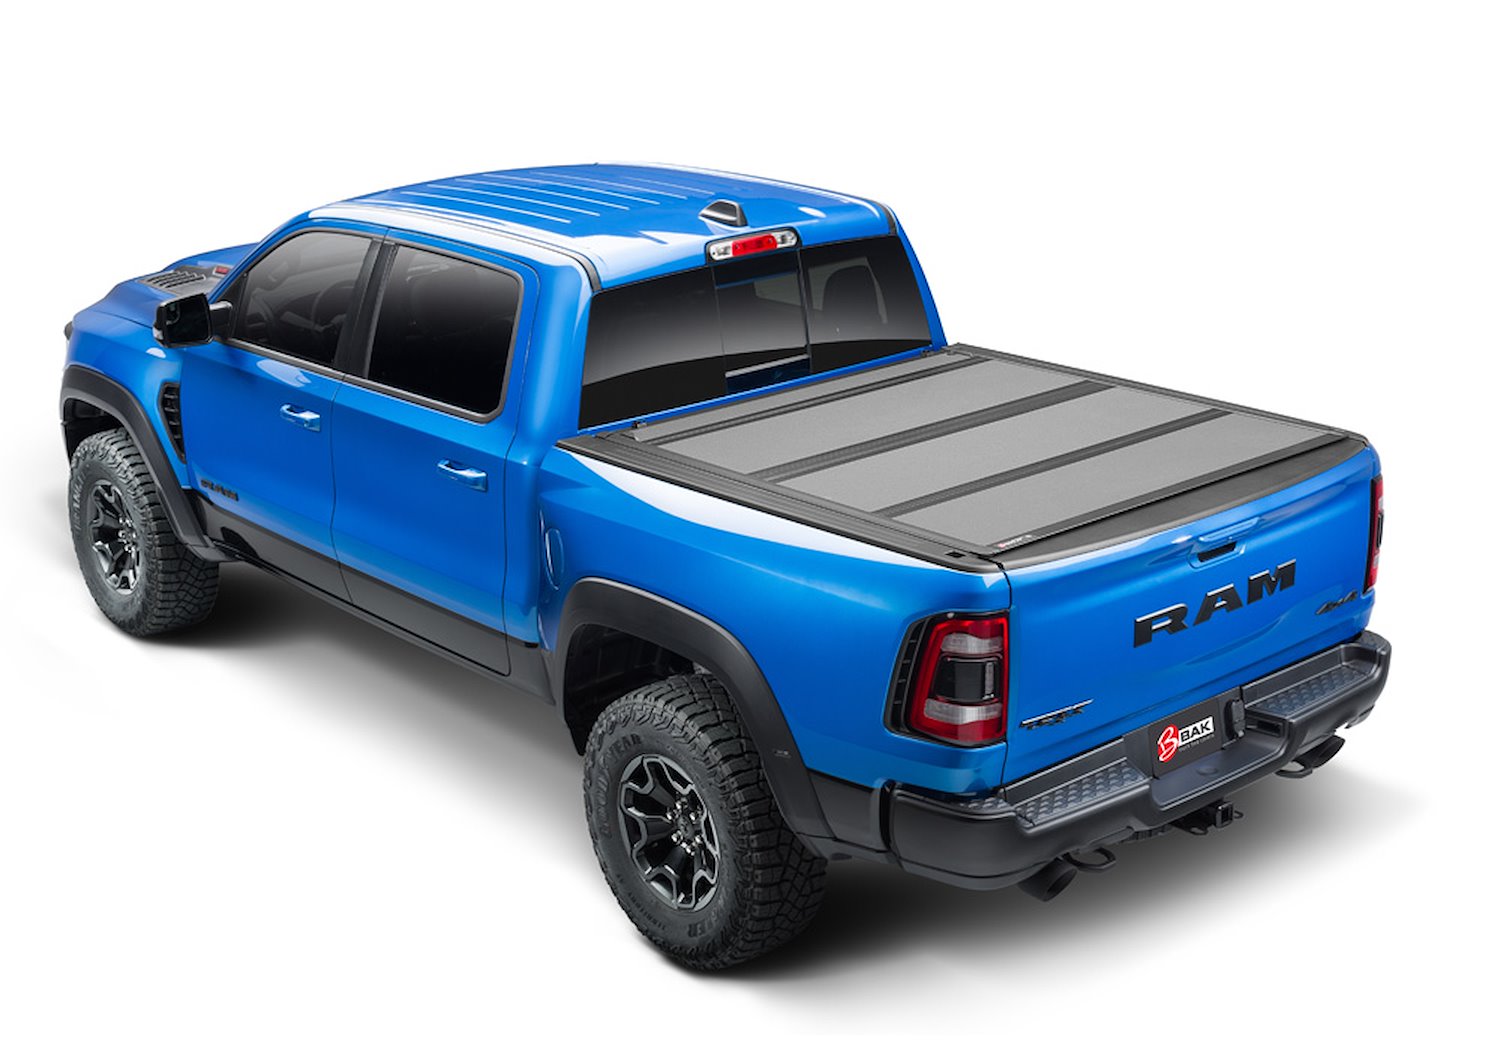 BAKFlip MX4 Tonneau Cover Fits Select Dodge Ram with Ram Box (New Body Style), Bed Length: 5.7 ft.